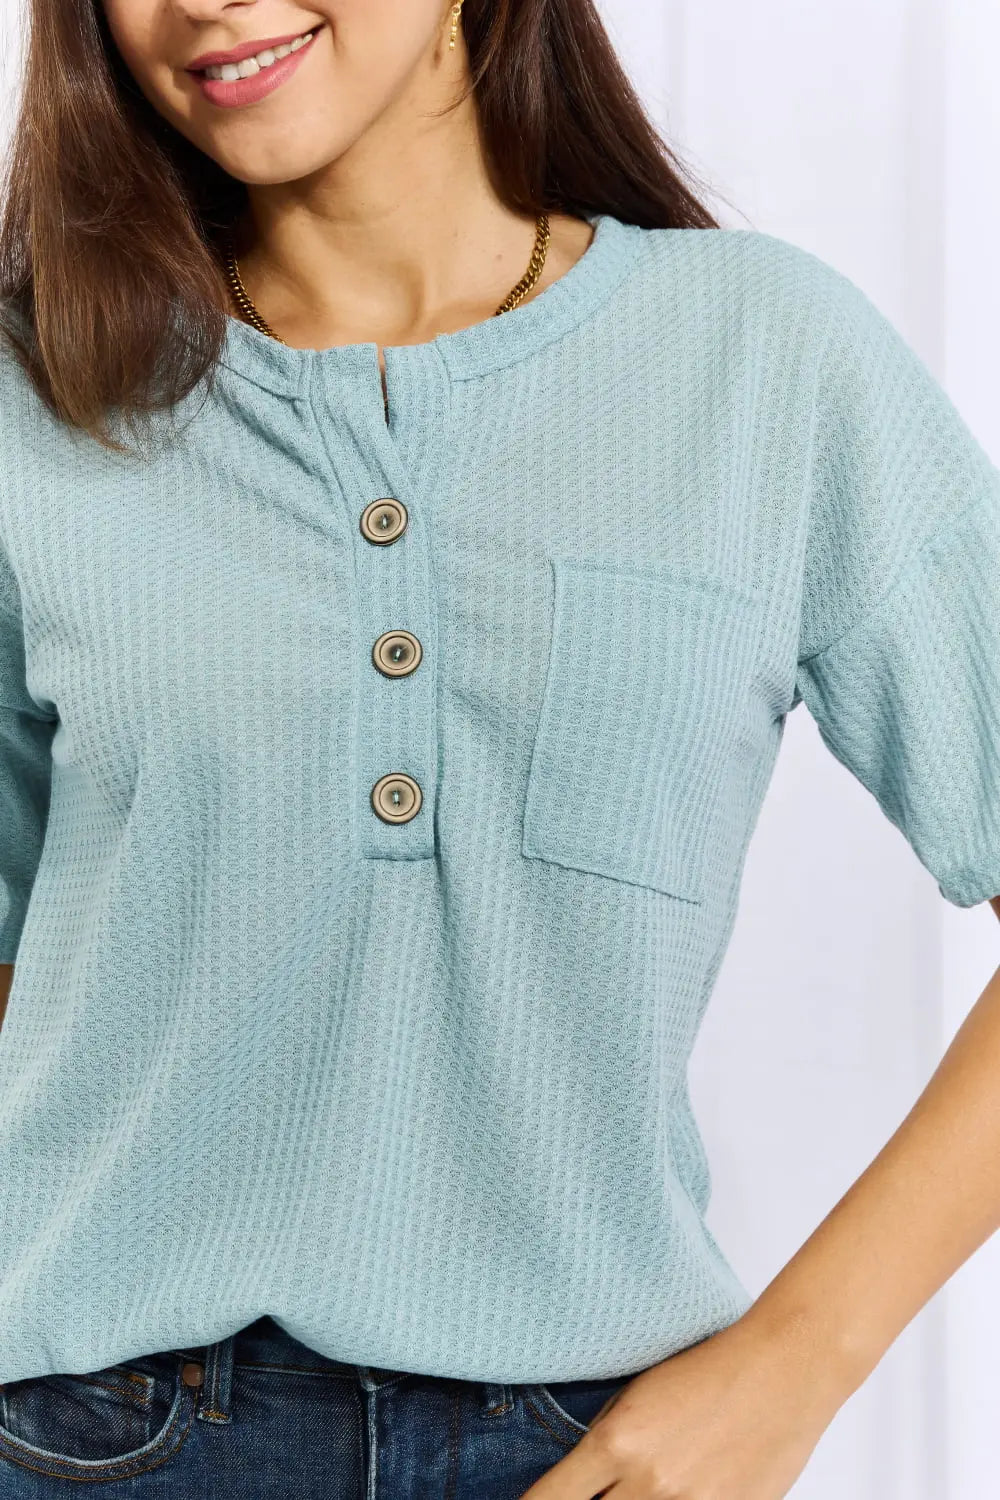 Heimish Made For You Full Size 1/4 Button Down Waffle Top in Blue - Hot Trends